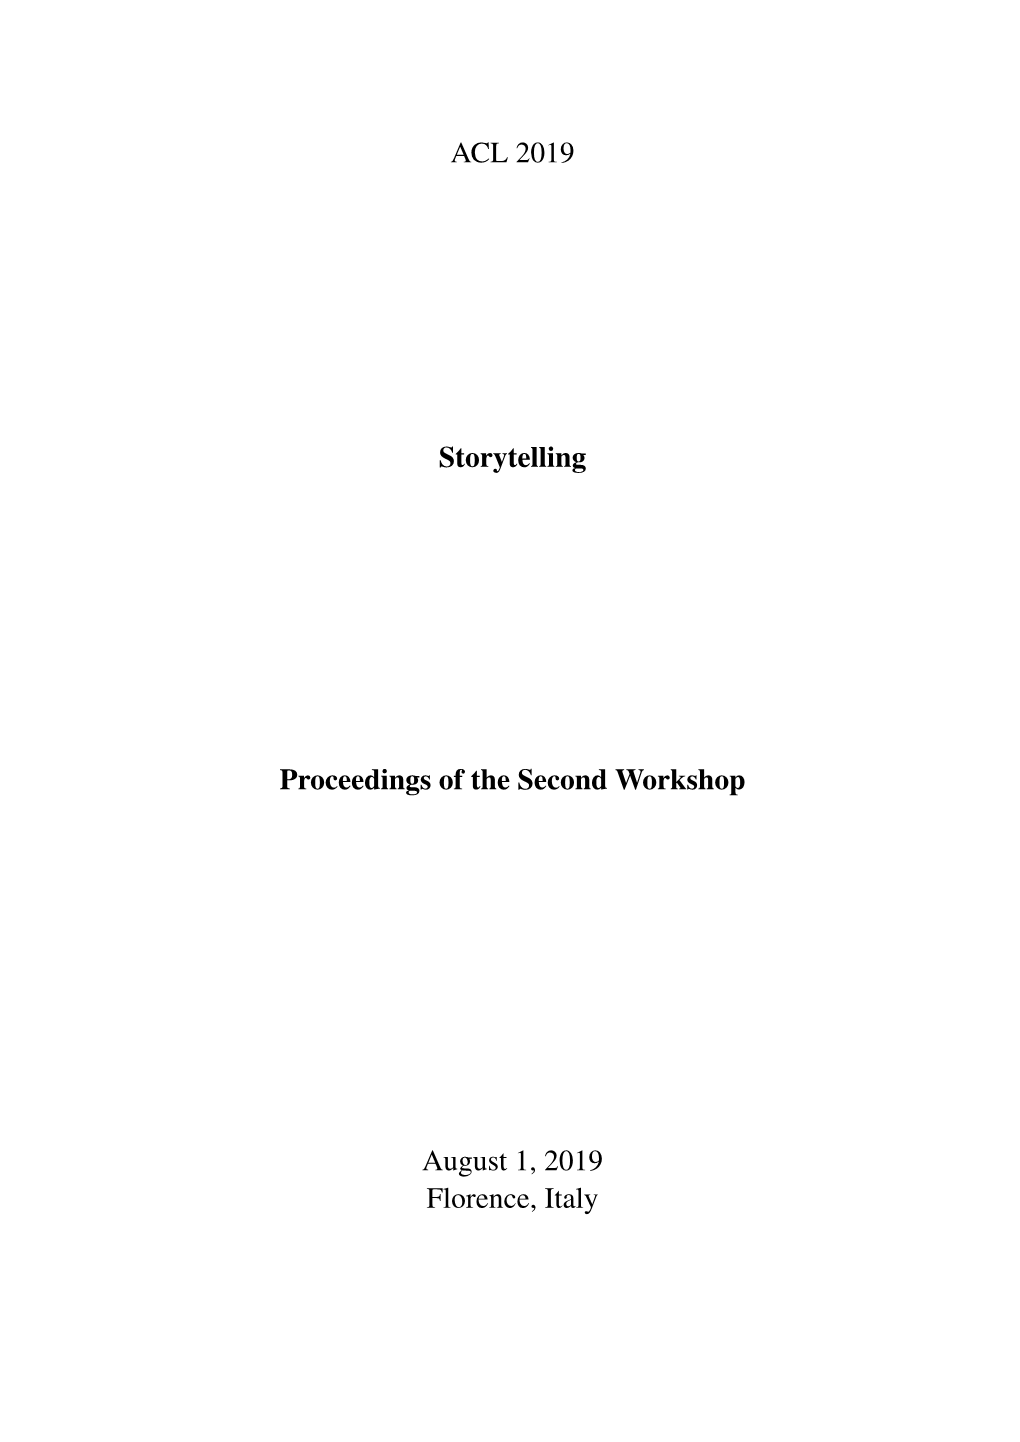 Proceedings of the Second Storytelling Workshop, Pages 1–10 Florence, Italy, August 1, 2019